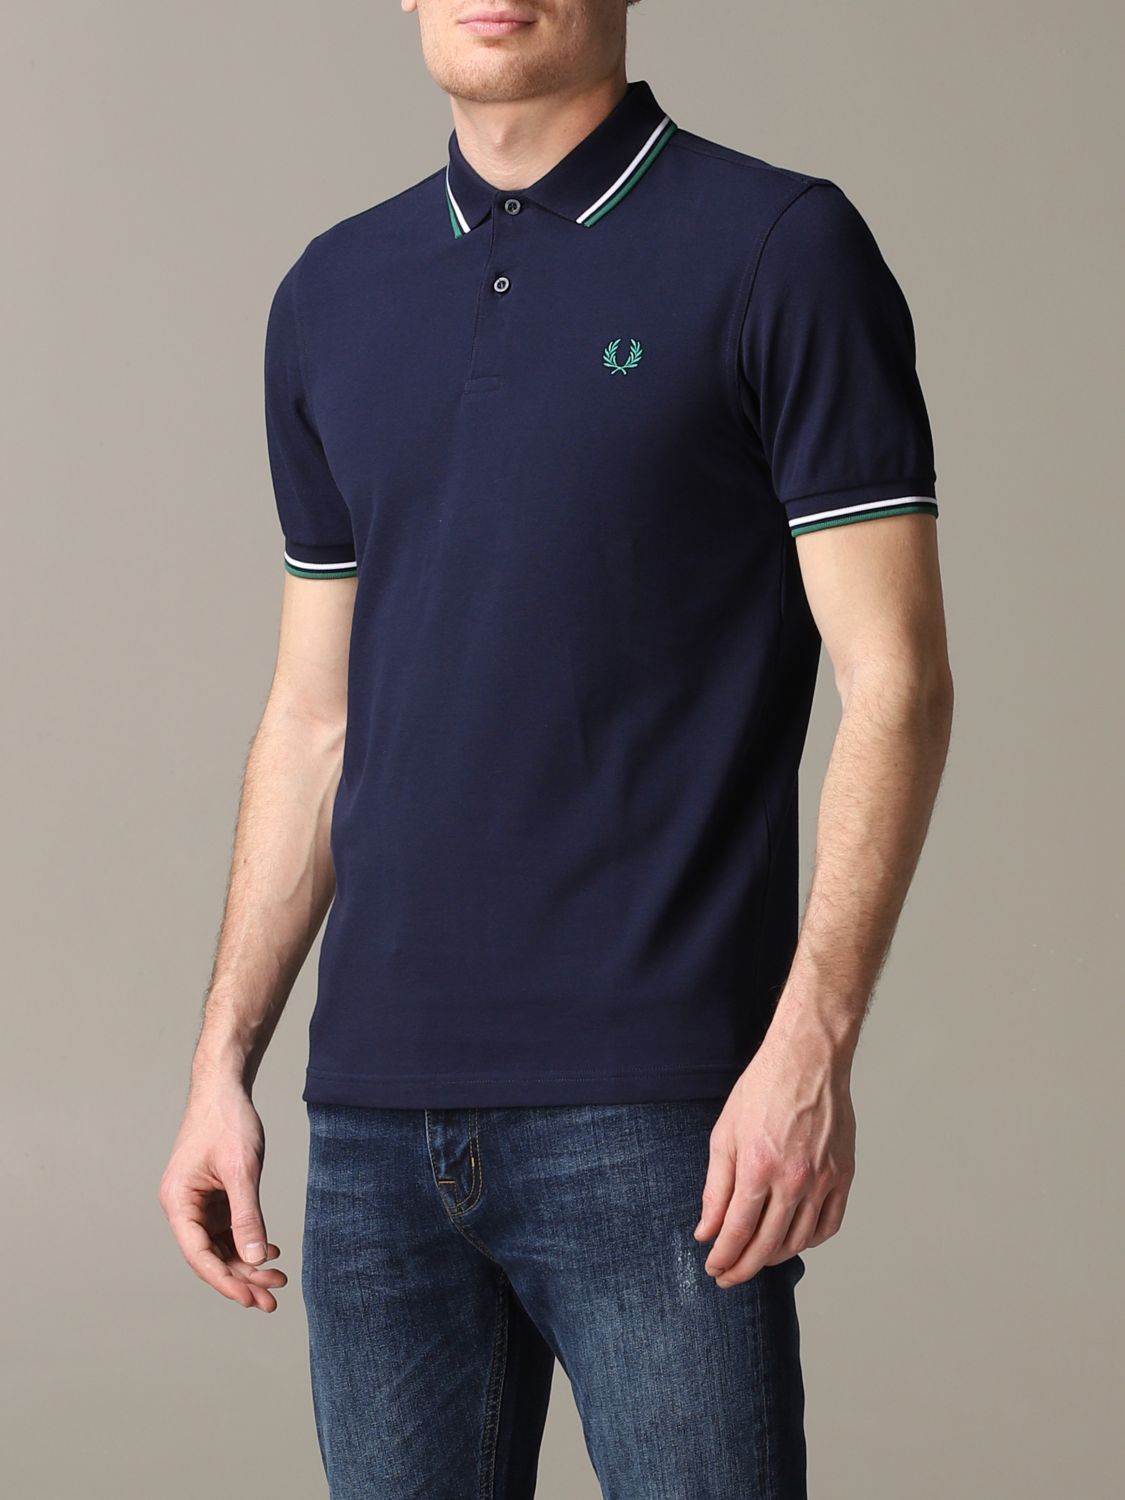 Fred Perry Outlet: polo shirt for man - Navy | Fred Perry polo shirt ...